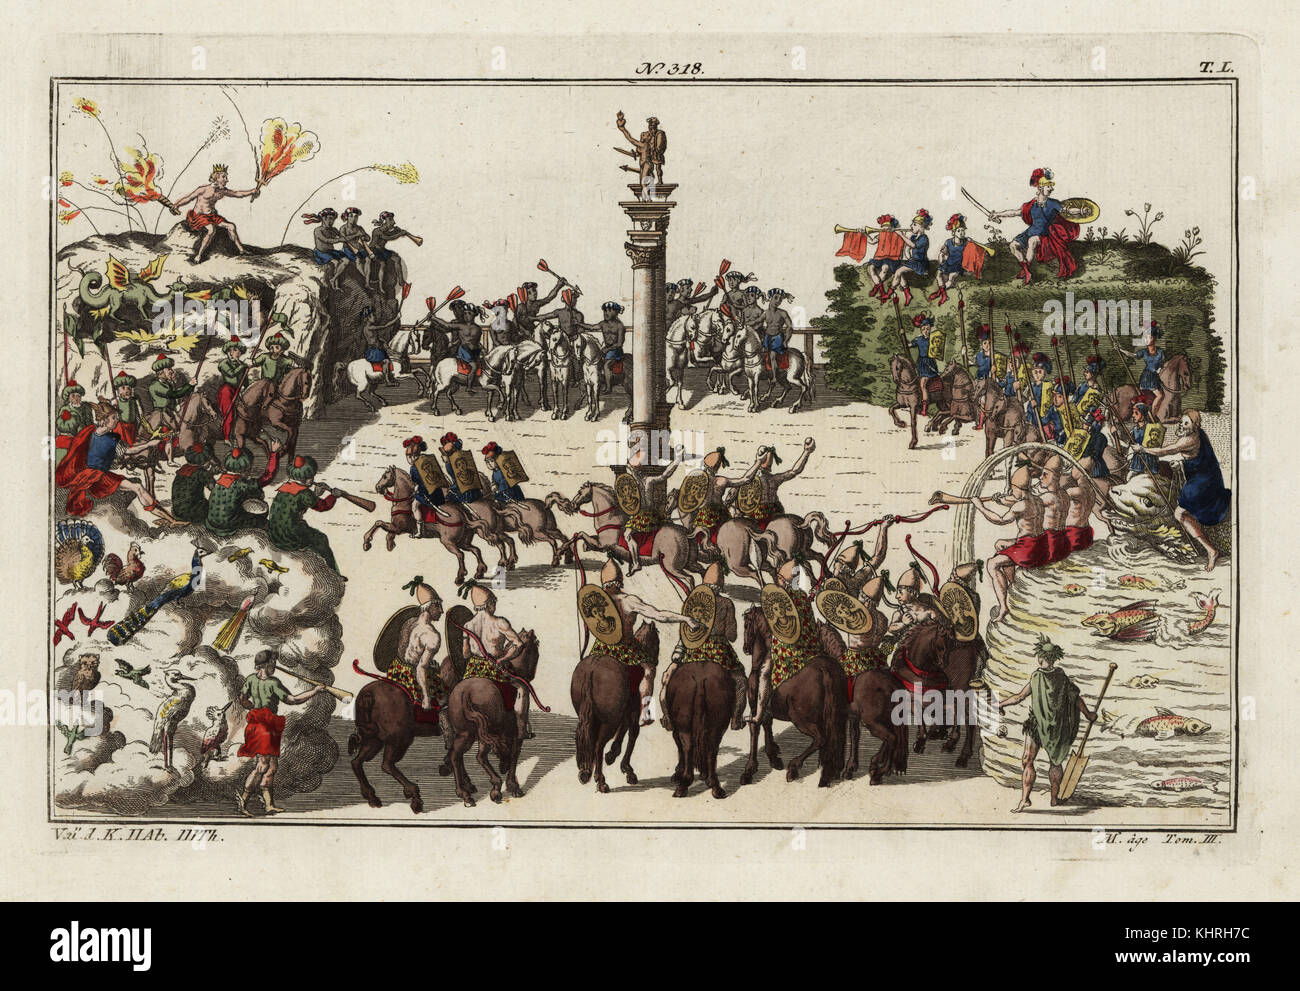 A carousel parade among teams of knights representing the four elements fire, wind, earth and water. Part of the celebration of the birth of Freiderich, Duke of Wurttemberg, 1616. Taken from Delineation und Abbildung aller furstlichen Anzug und Ritterspielen by Esaias von Hulsen, 1617. Handcoloured copperplate engraving from Robert von Spalart's Historical Picture of the Costumes of the Principal People of Antiquity and of the Middle Ages, Chez Collignon, Metz, 1810. Stock Photo